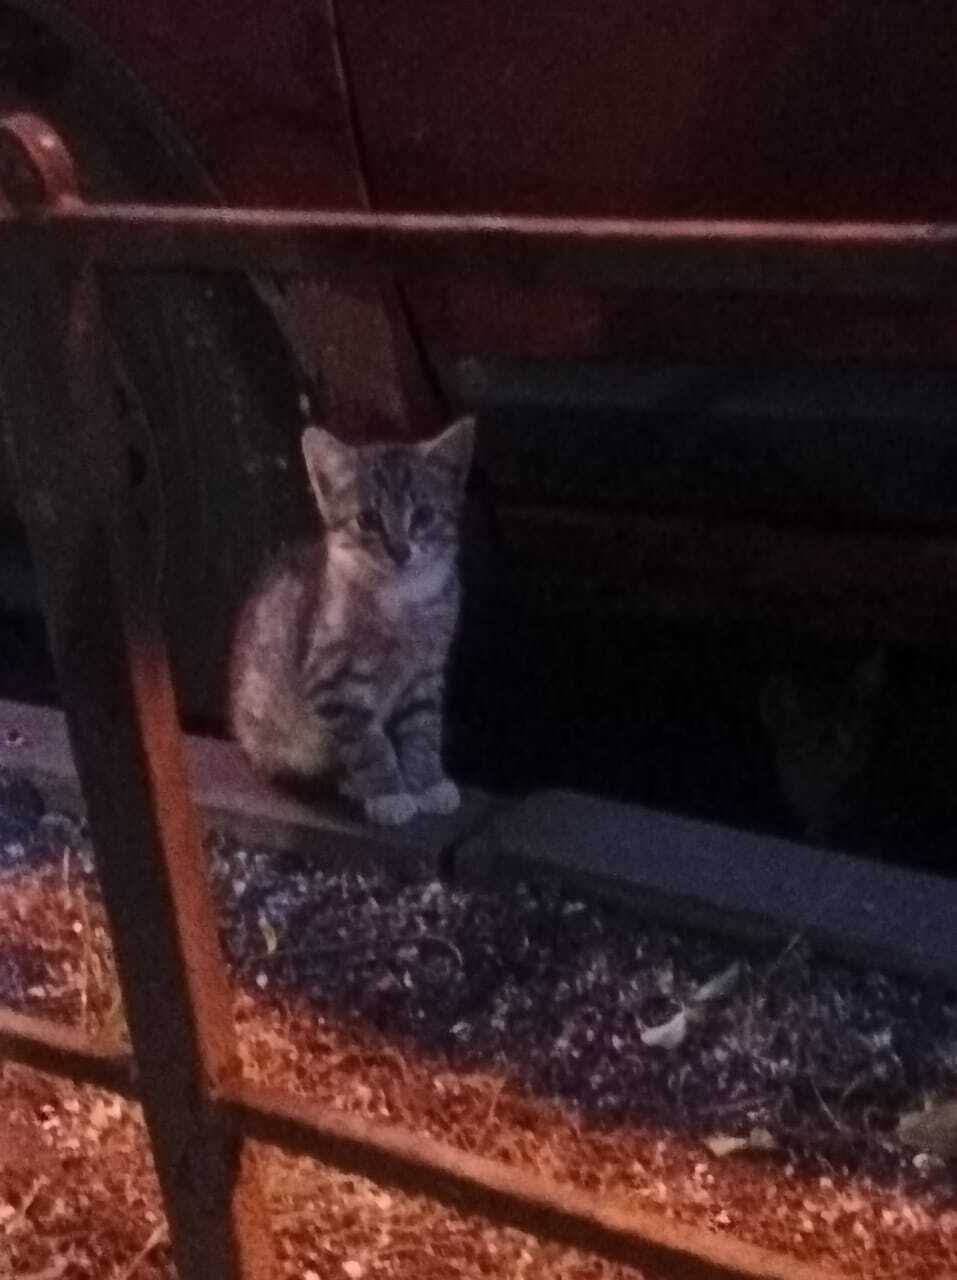 We help. 4 kittens on the street, hiding on the wheels of the car and in the hood. Need help in catching and foster care - cat, Kittens, Homeless animals, Helping animals, No rating, In good hands, Longpost